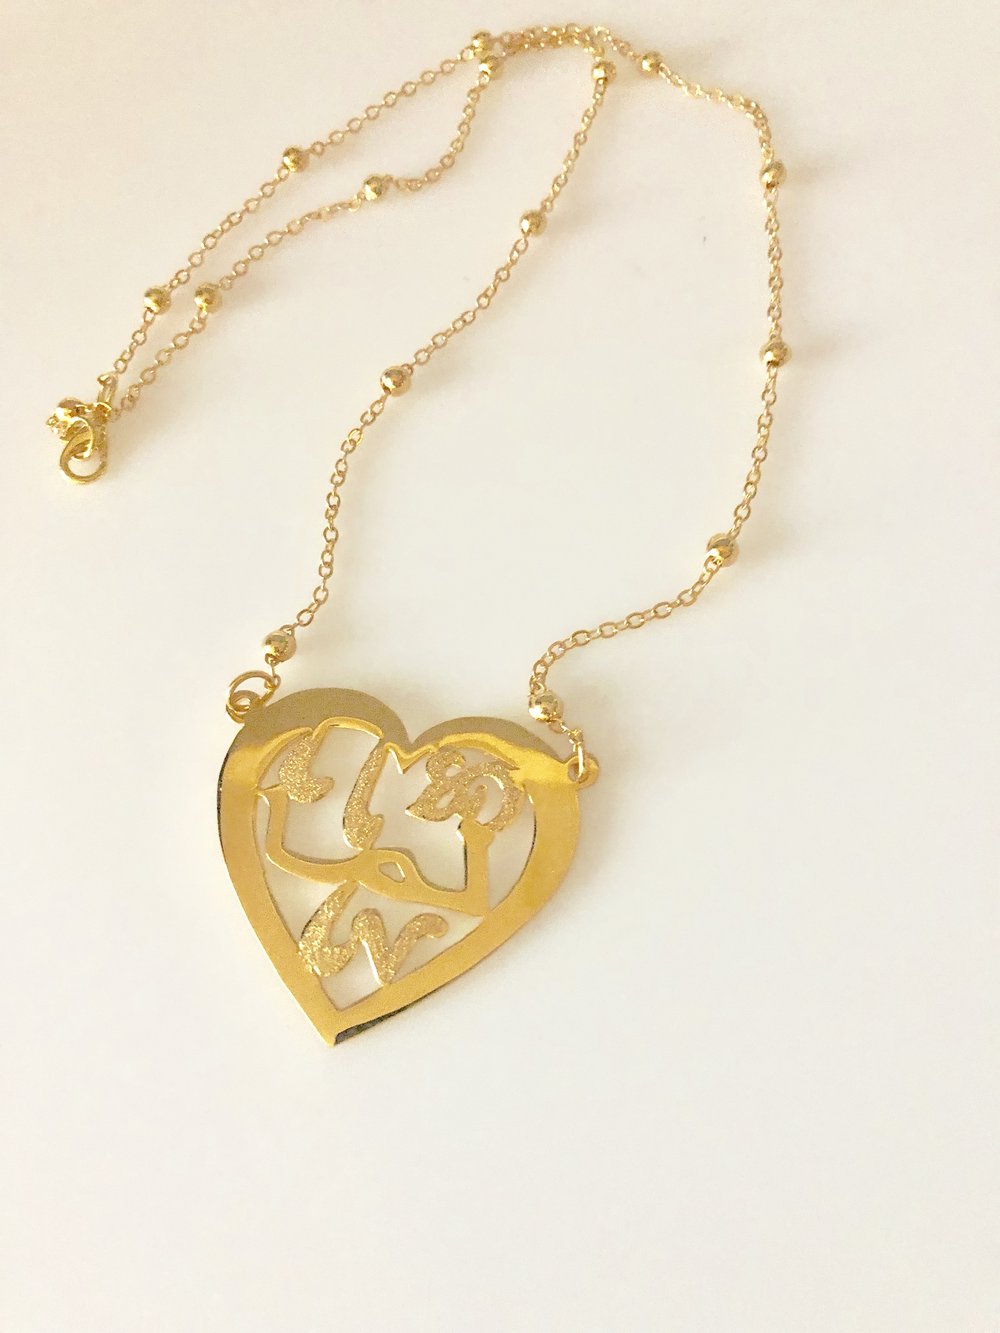 Name Necklace - Big Heart